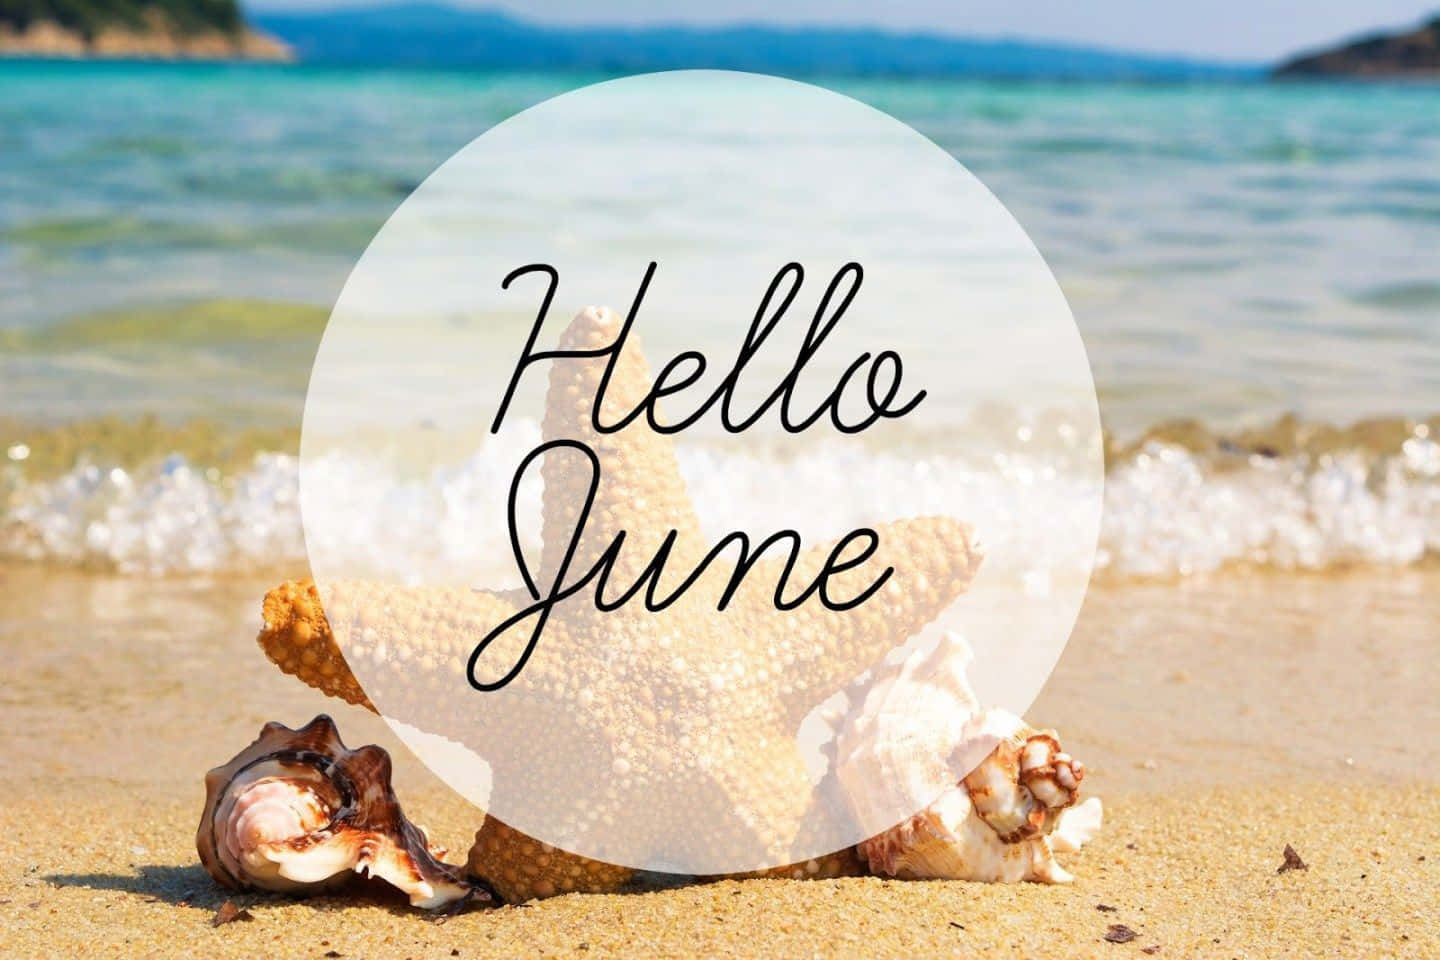 hello june on the beach with starfish Wallpaper